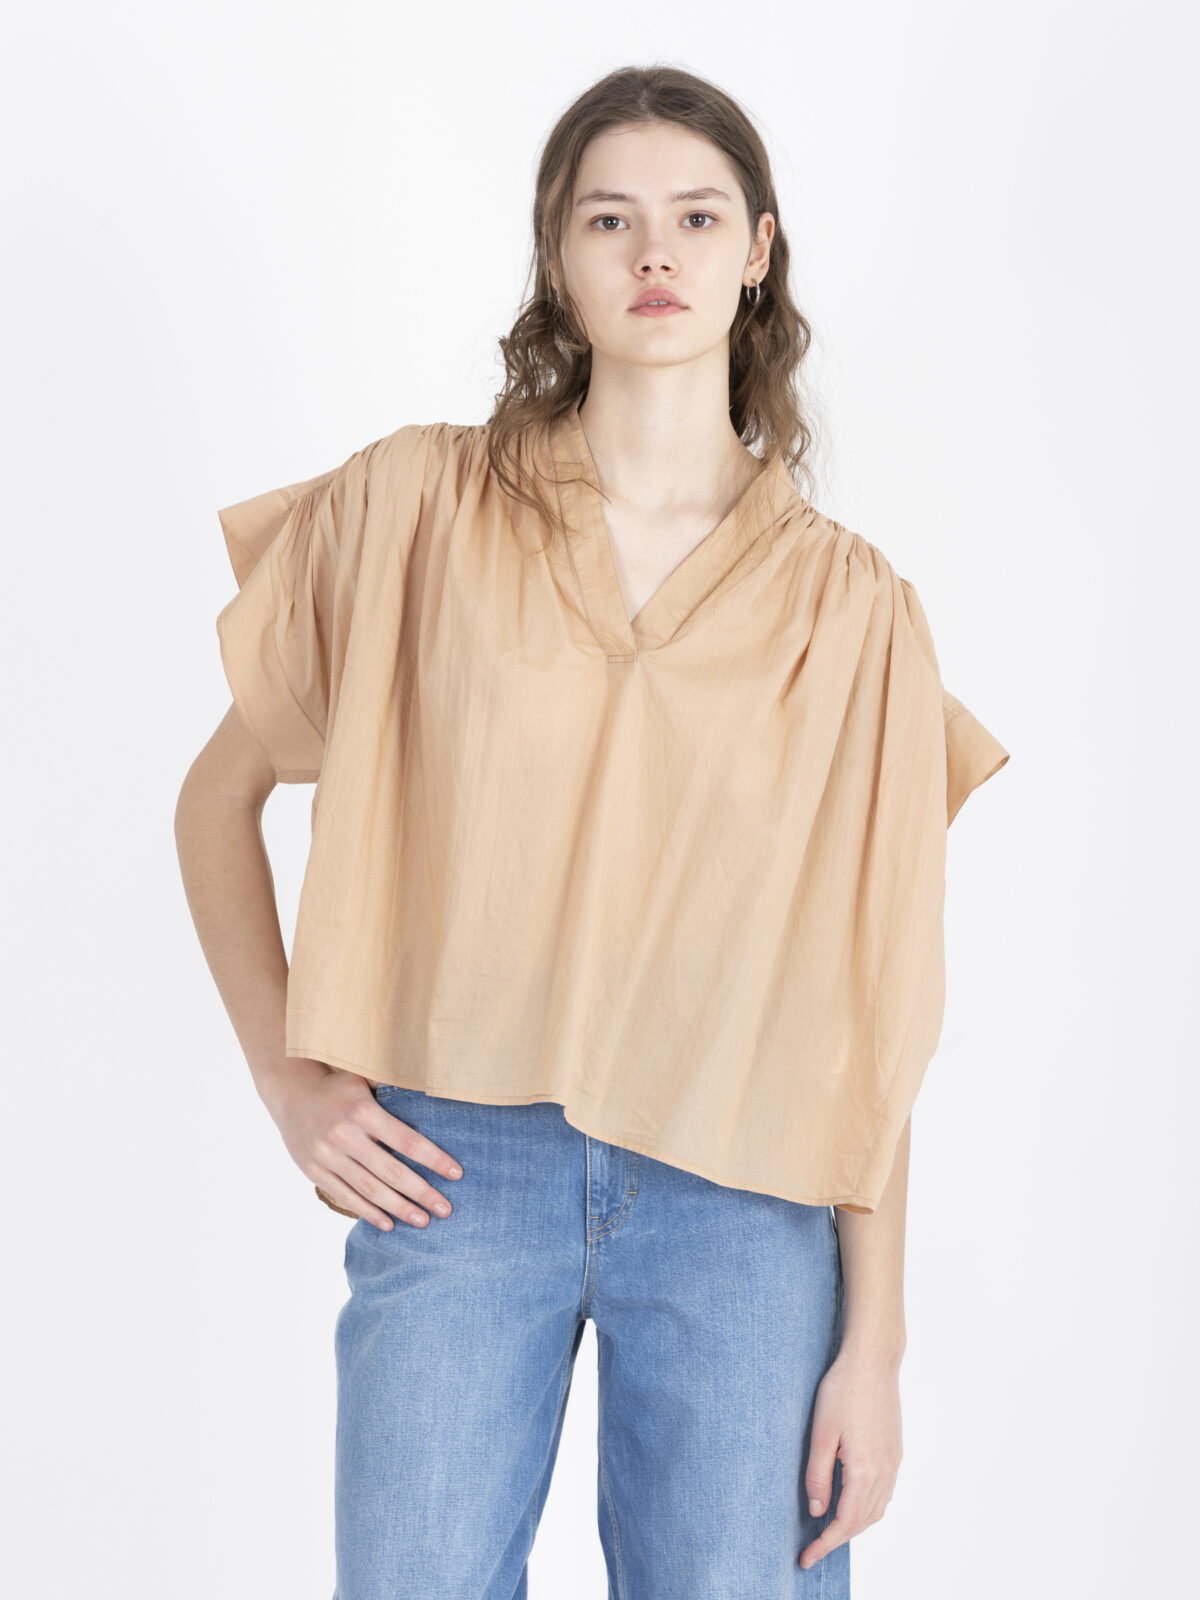 cory-macadamia-blouse-voile-cotton-ruched-details-airy-vneck-vanessa-bruno-matchboxathens